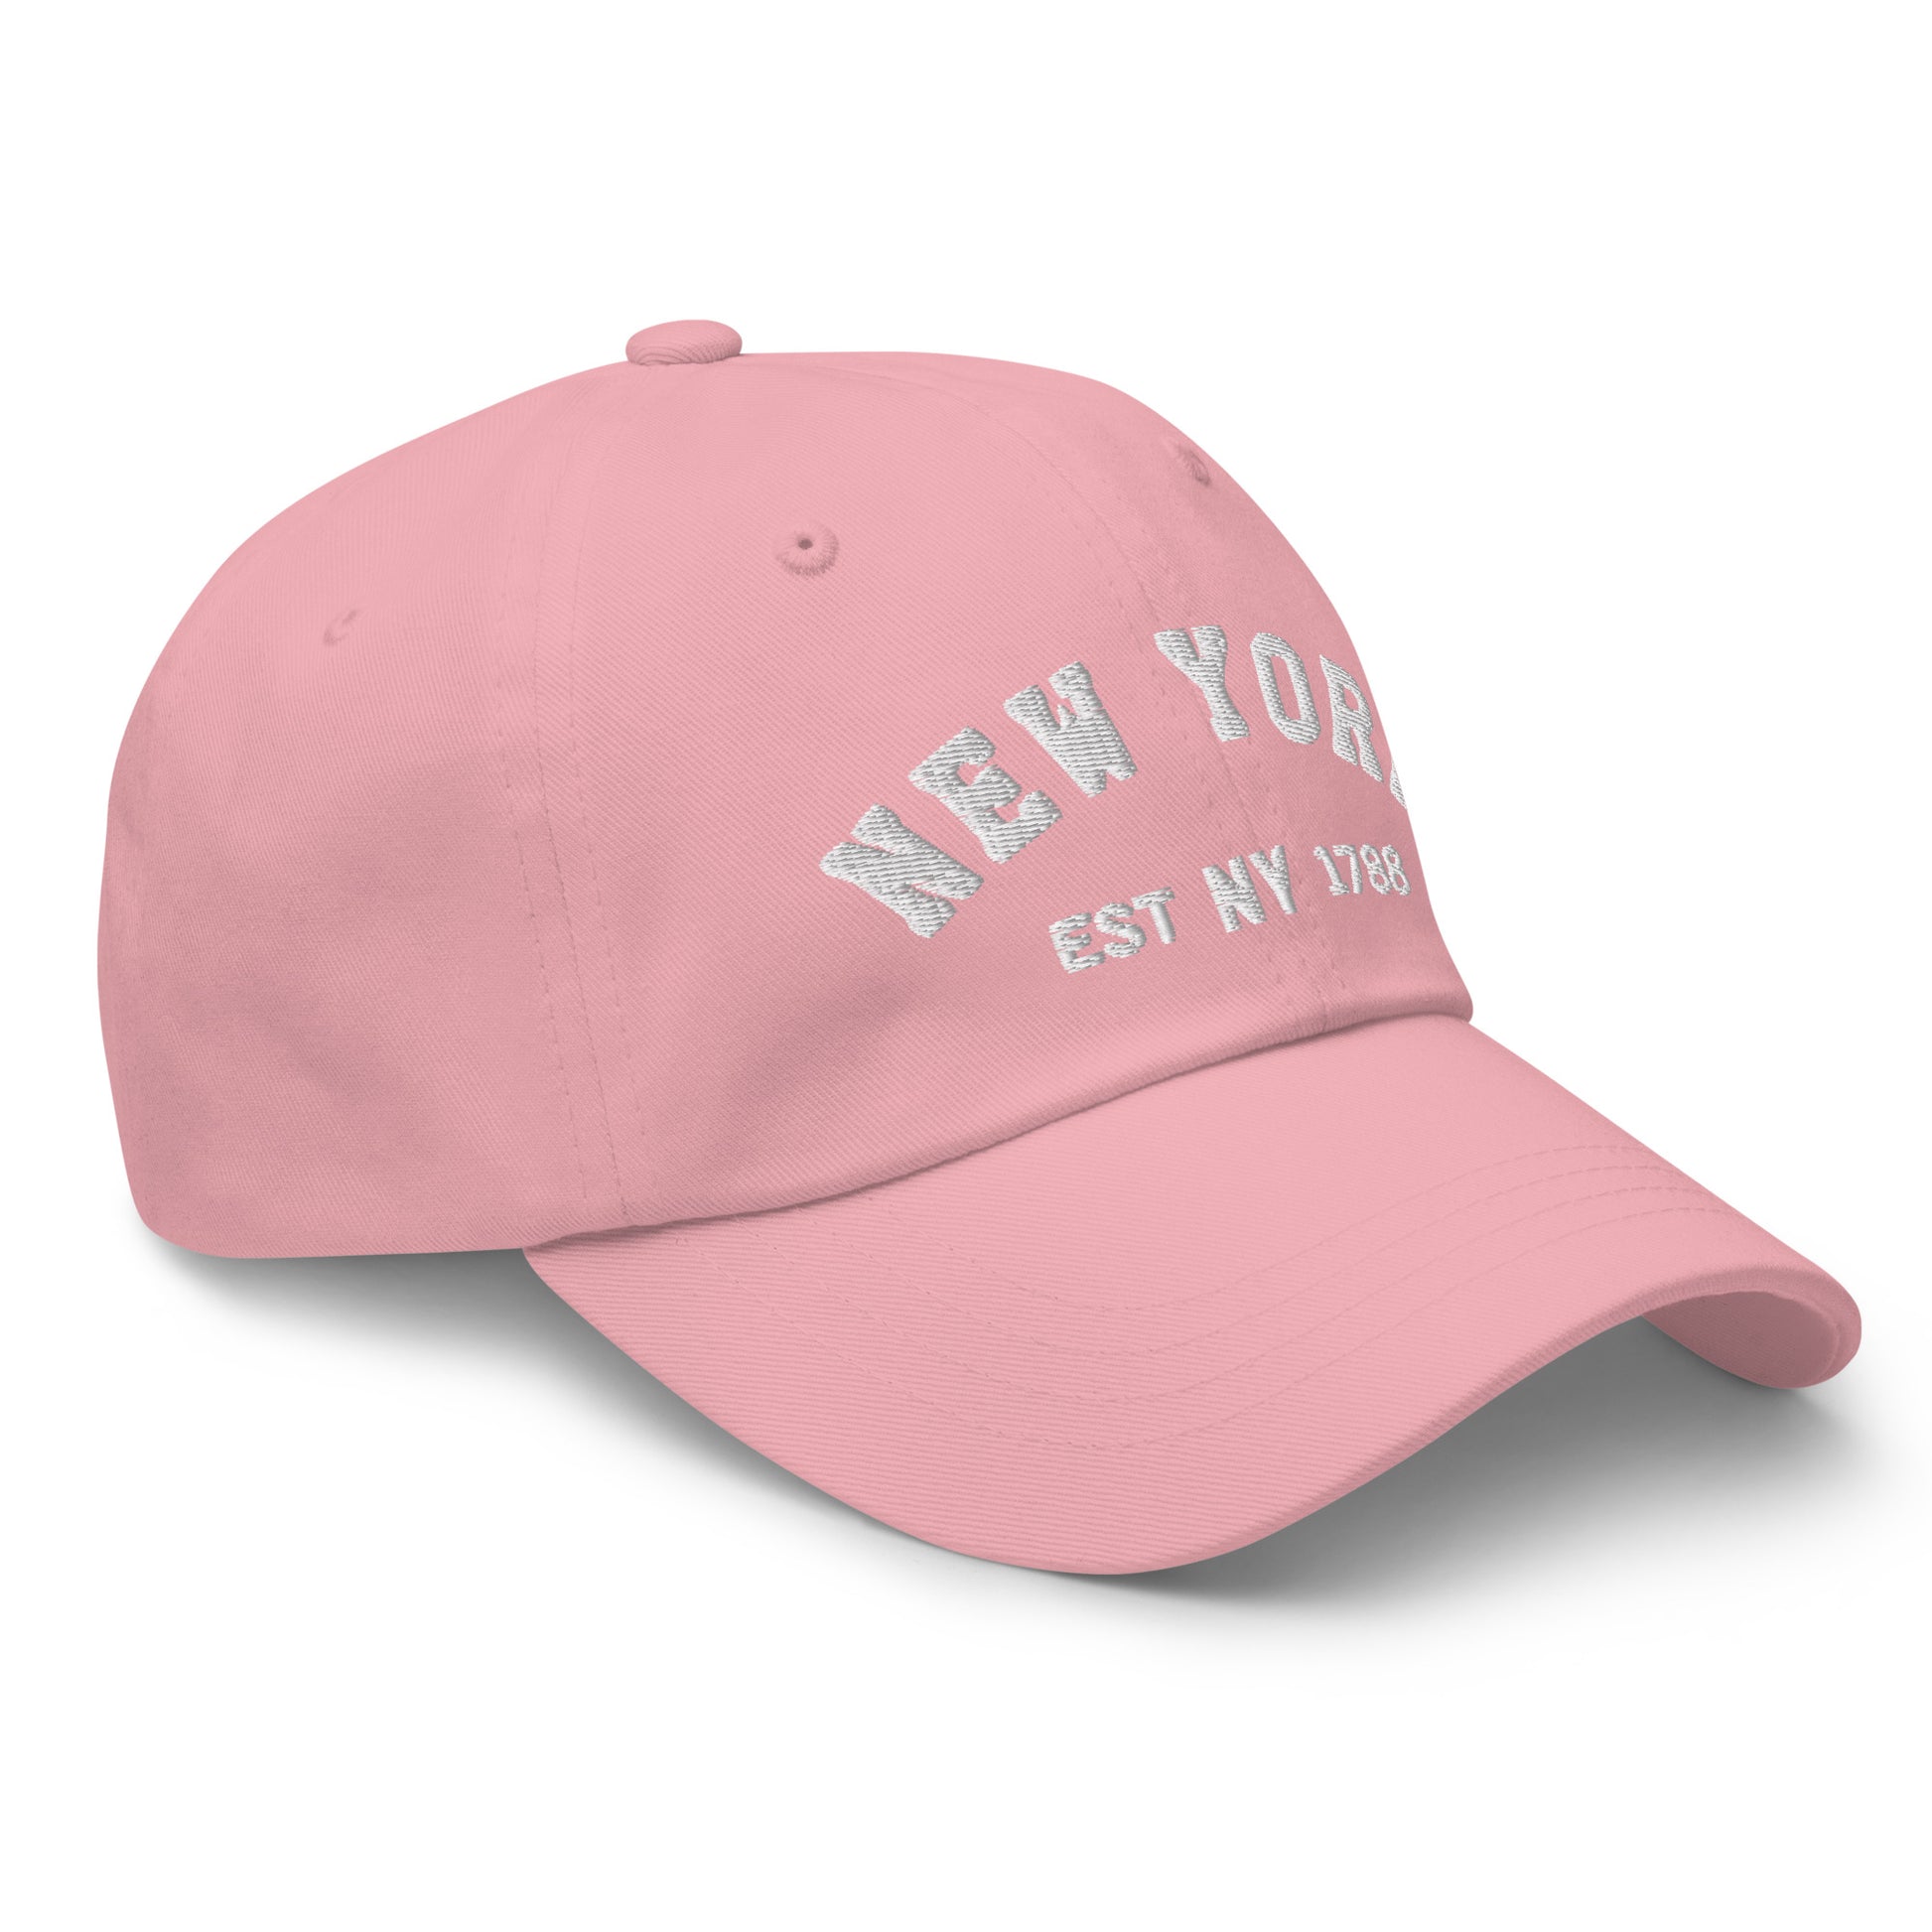 New York Baseball Dad Hat Cap, I Love NY City State USA Retro Mom Trucker Men Women Embroidery Embroidered Hat Gift Starcove Fashion